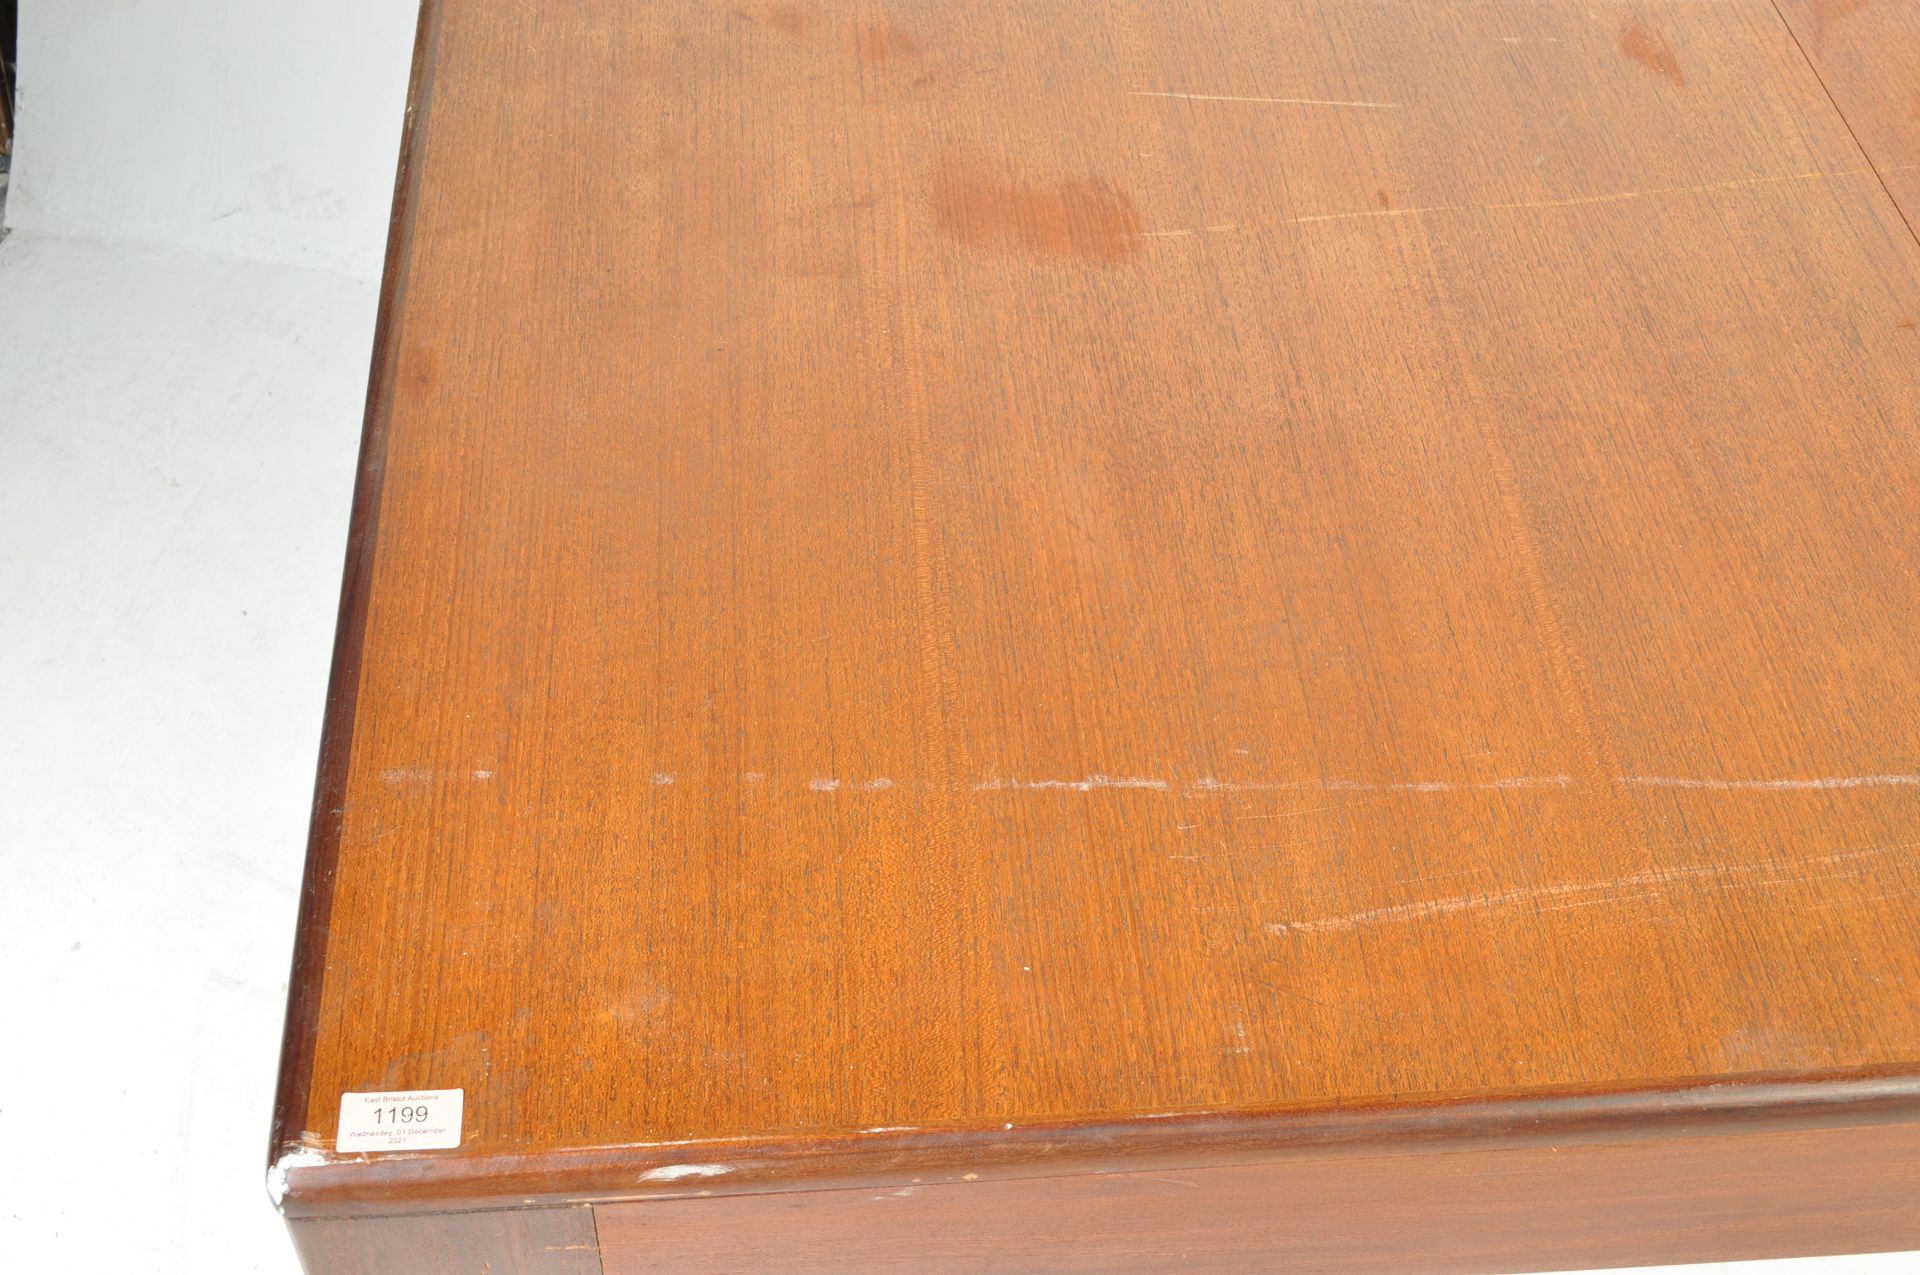 MID 20TH CENTURY TEAK WOOD EXTENDING DING TABLE - Image 5 of 7